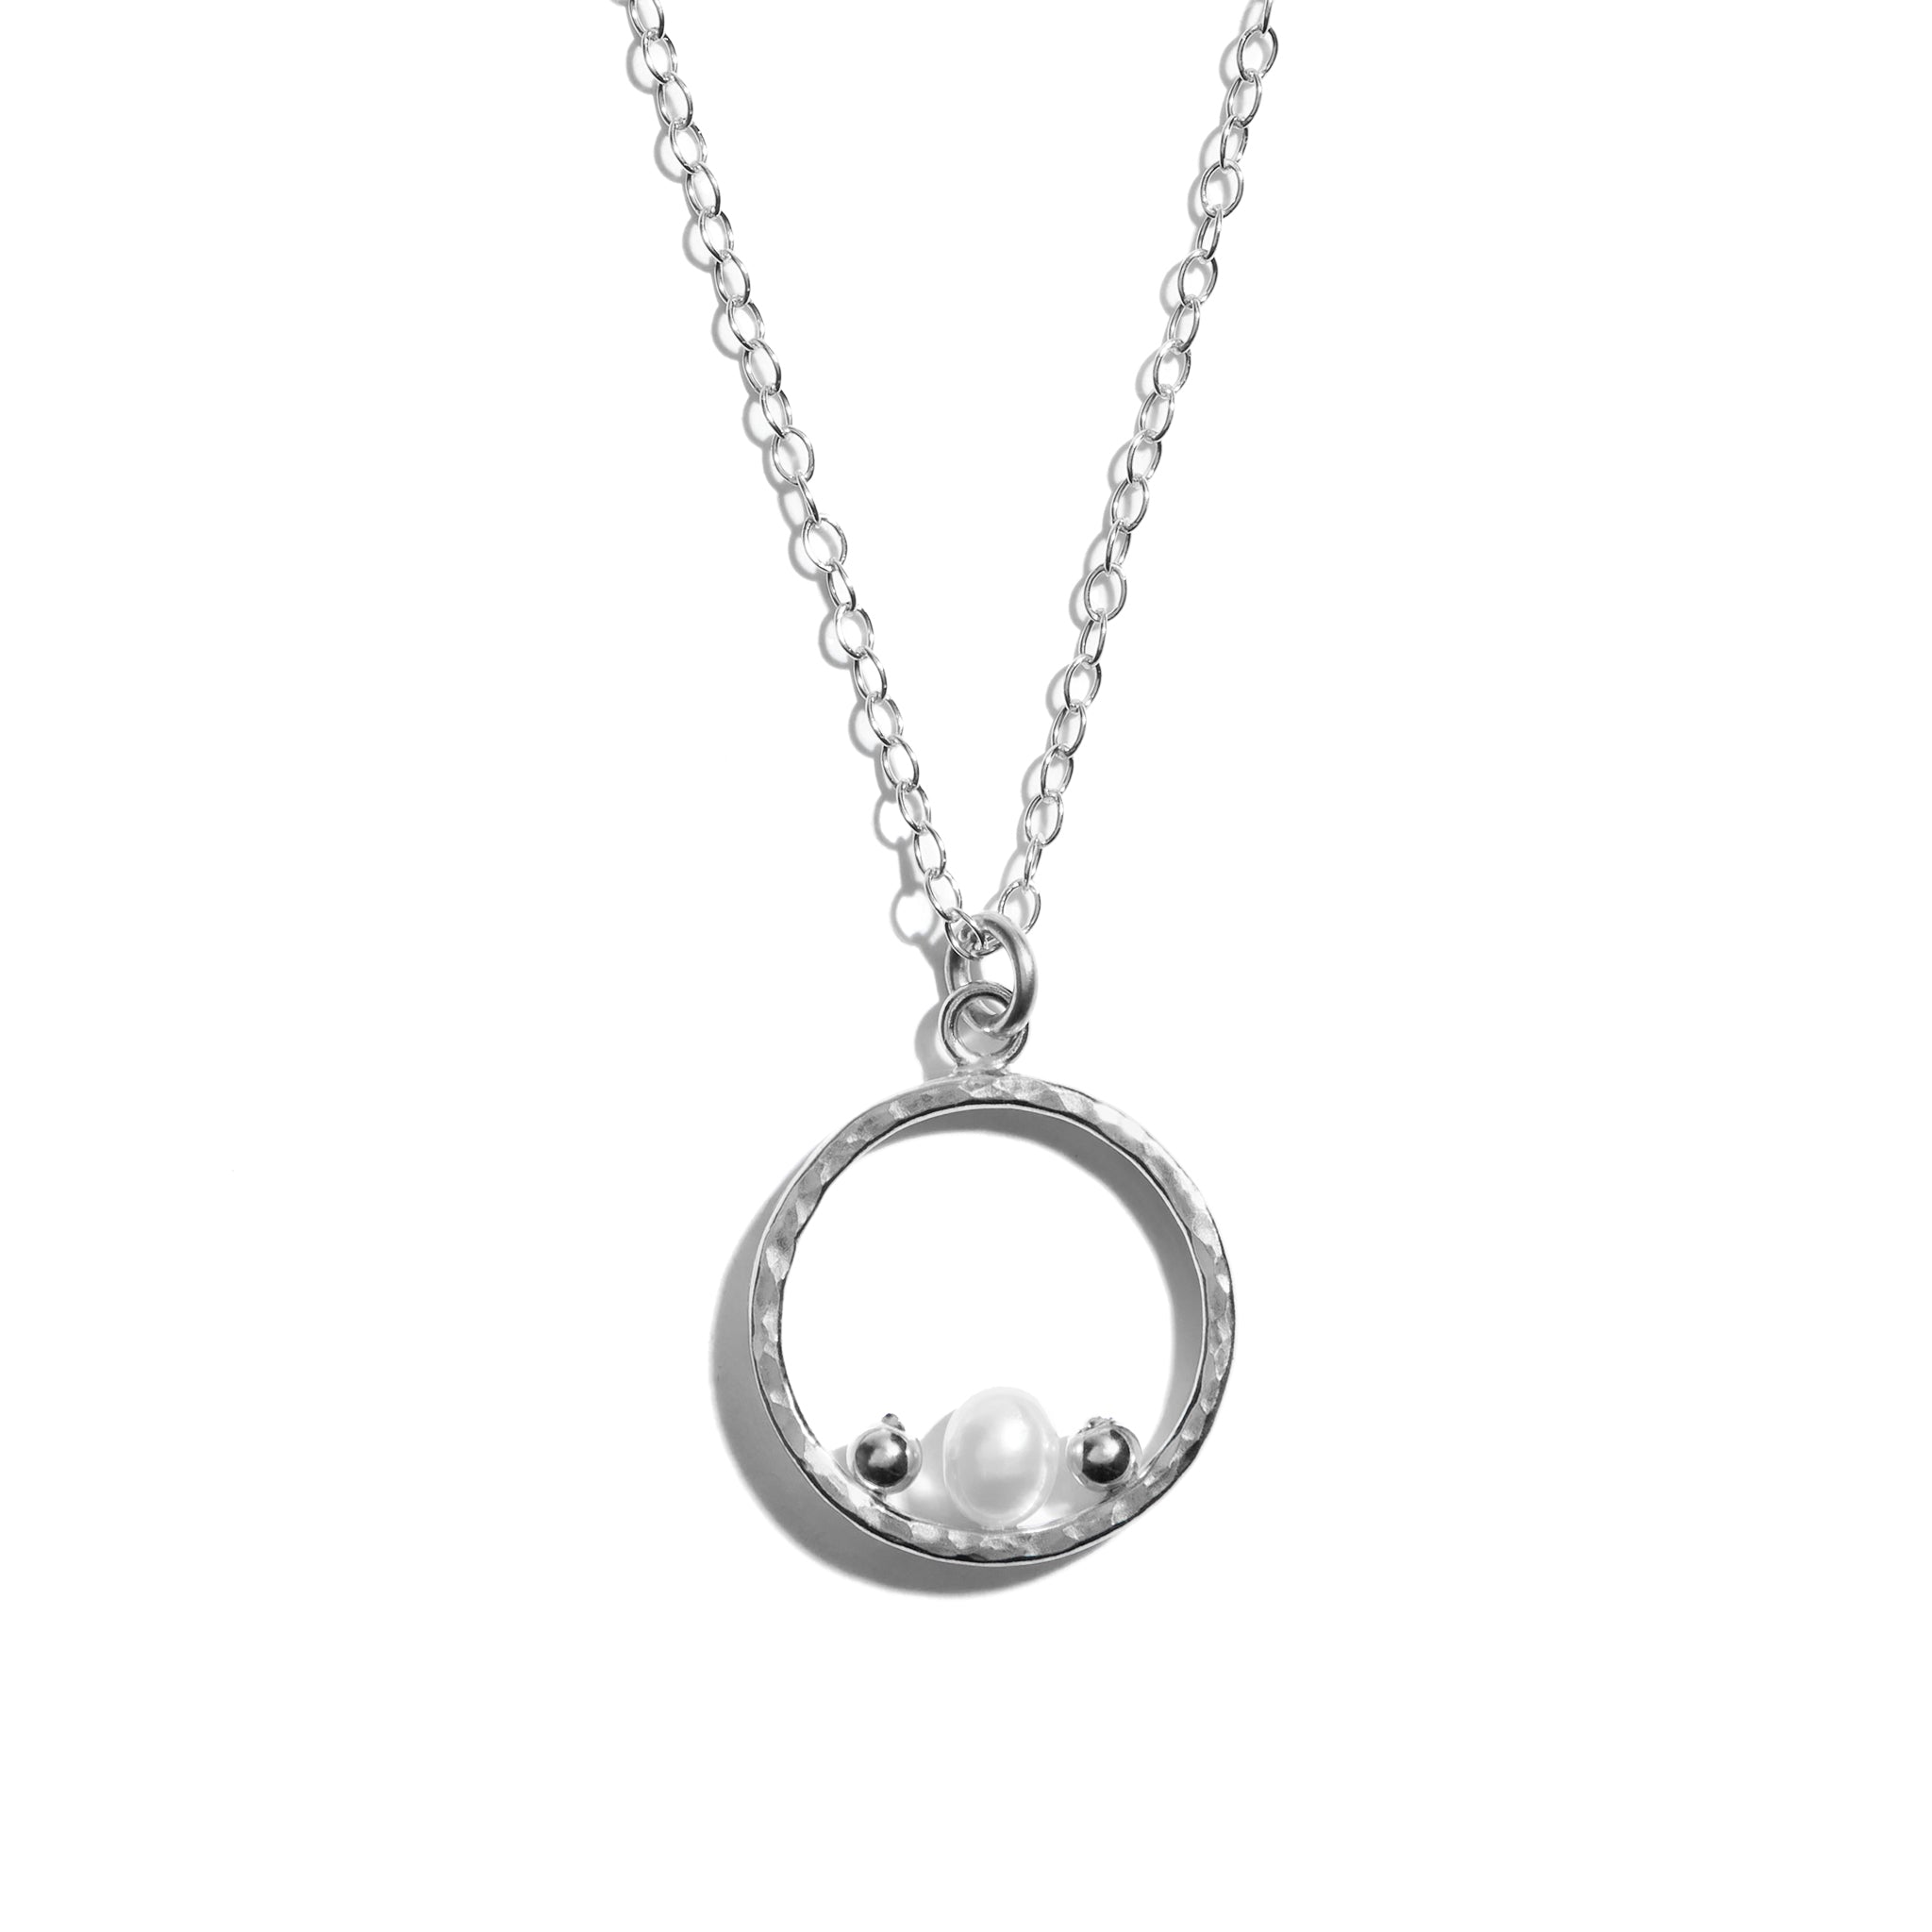 Photo of a luxurious silver pearl necklace crafted from sterling silver. The delicate pearls are elegantly arranged within the circular pendant, exuding timeless sophistication and charm.